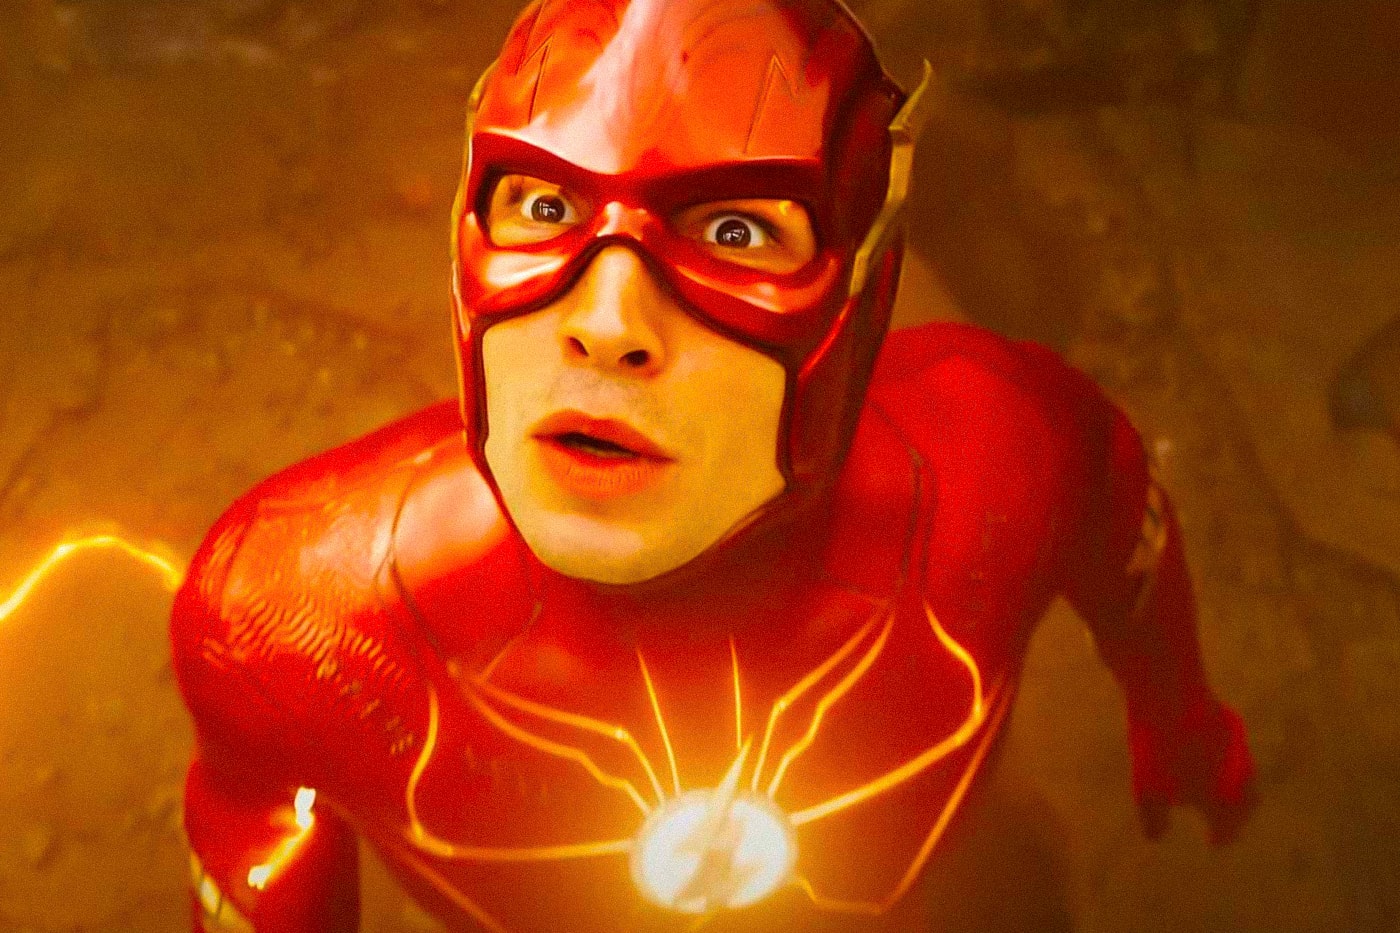 'The Flash' Disappoints With Debut Box Office Flop of $55 Million USD warner bros era miller james gunn dc comics superhero speed